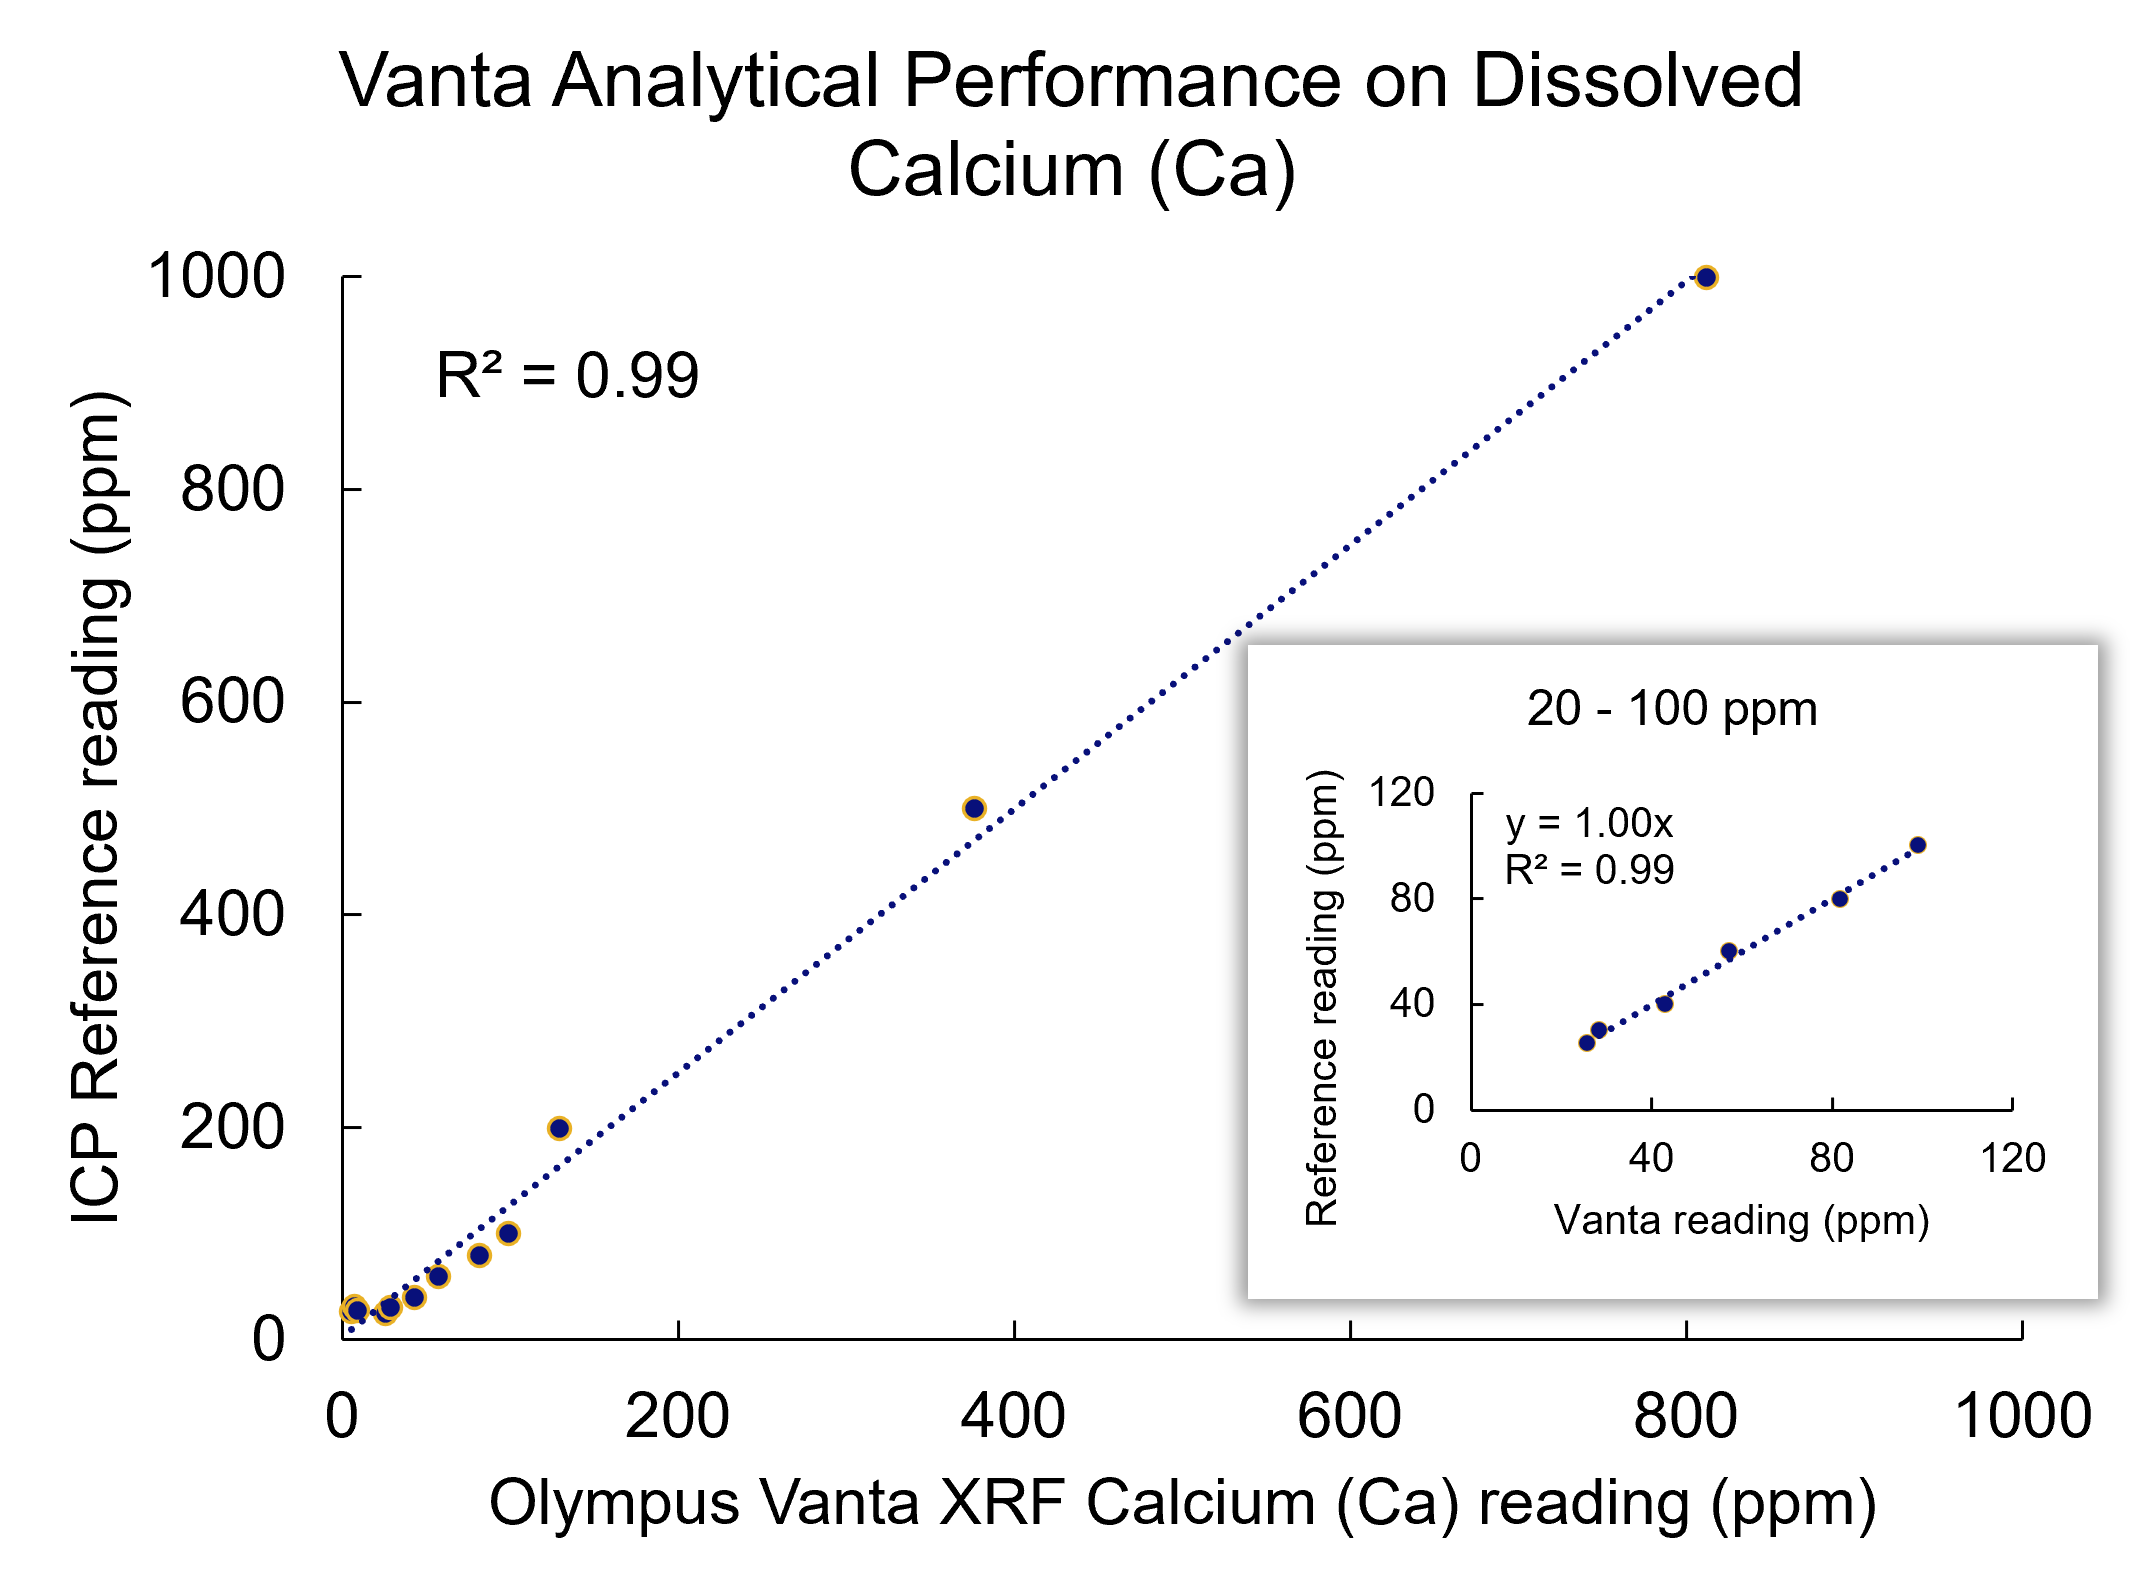 Vanta pXRF analytical performance on dissolved calcium against an ICP reference sample (inset showing lower concentrations)